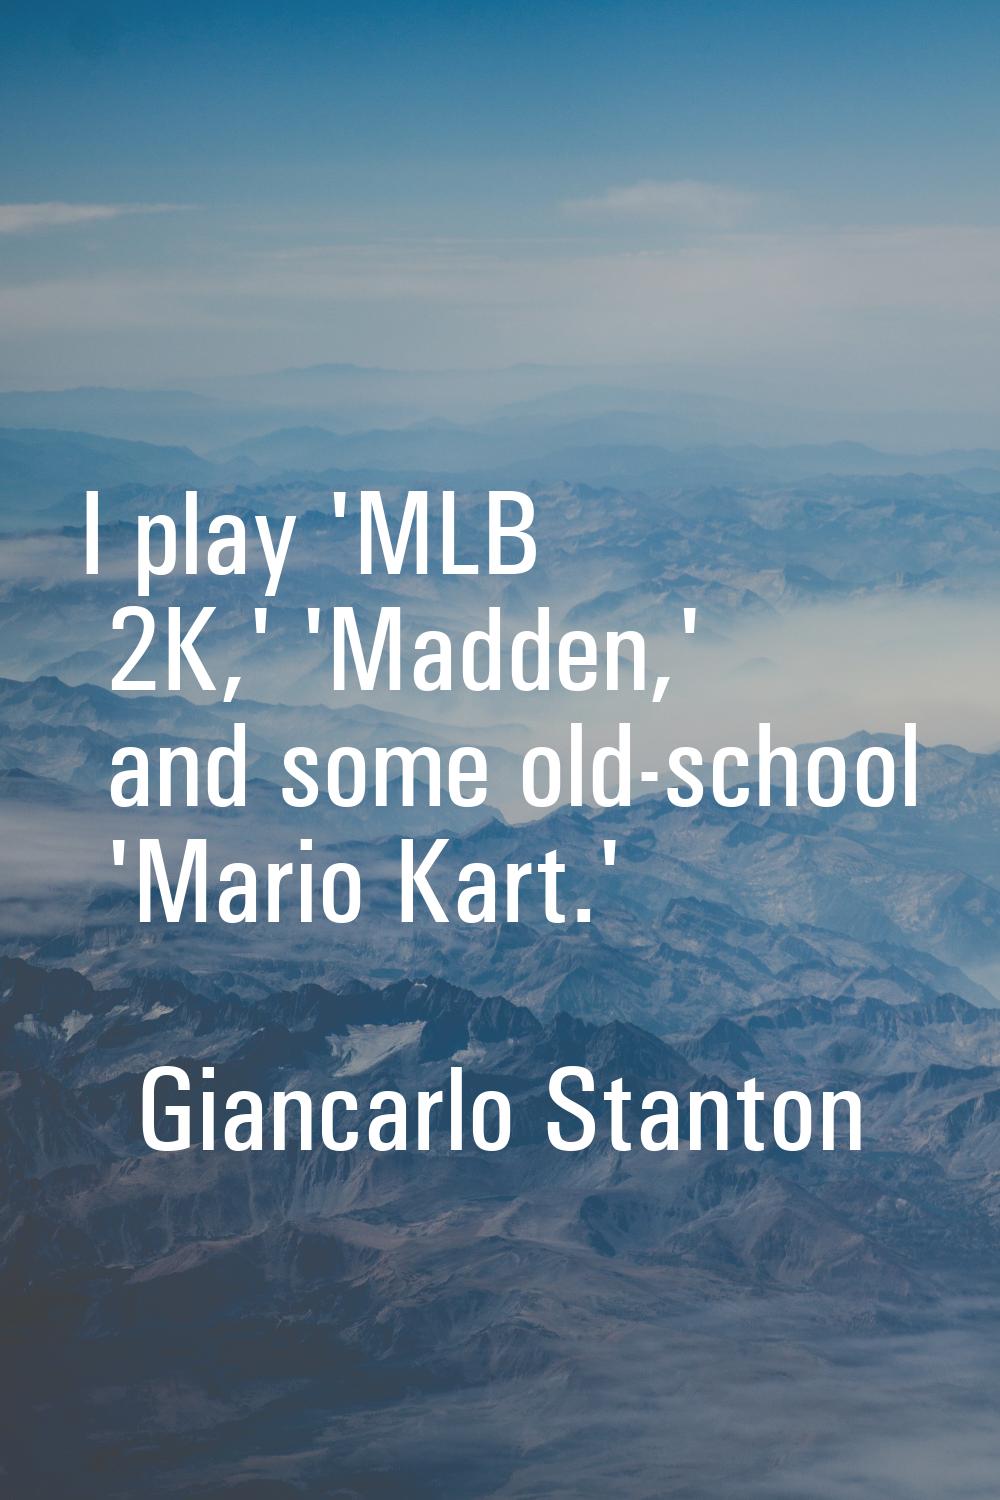 I play 'MLB 2K,' 'Madden,' and some old-school 'Mario Kart.'